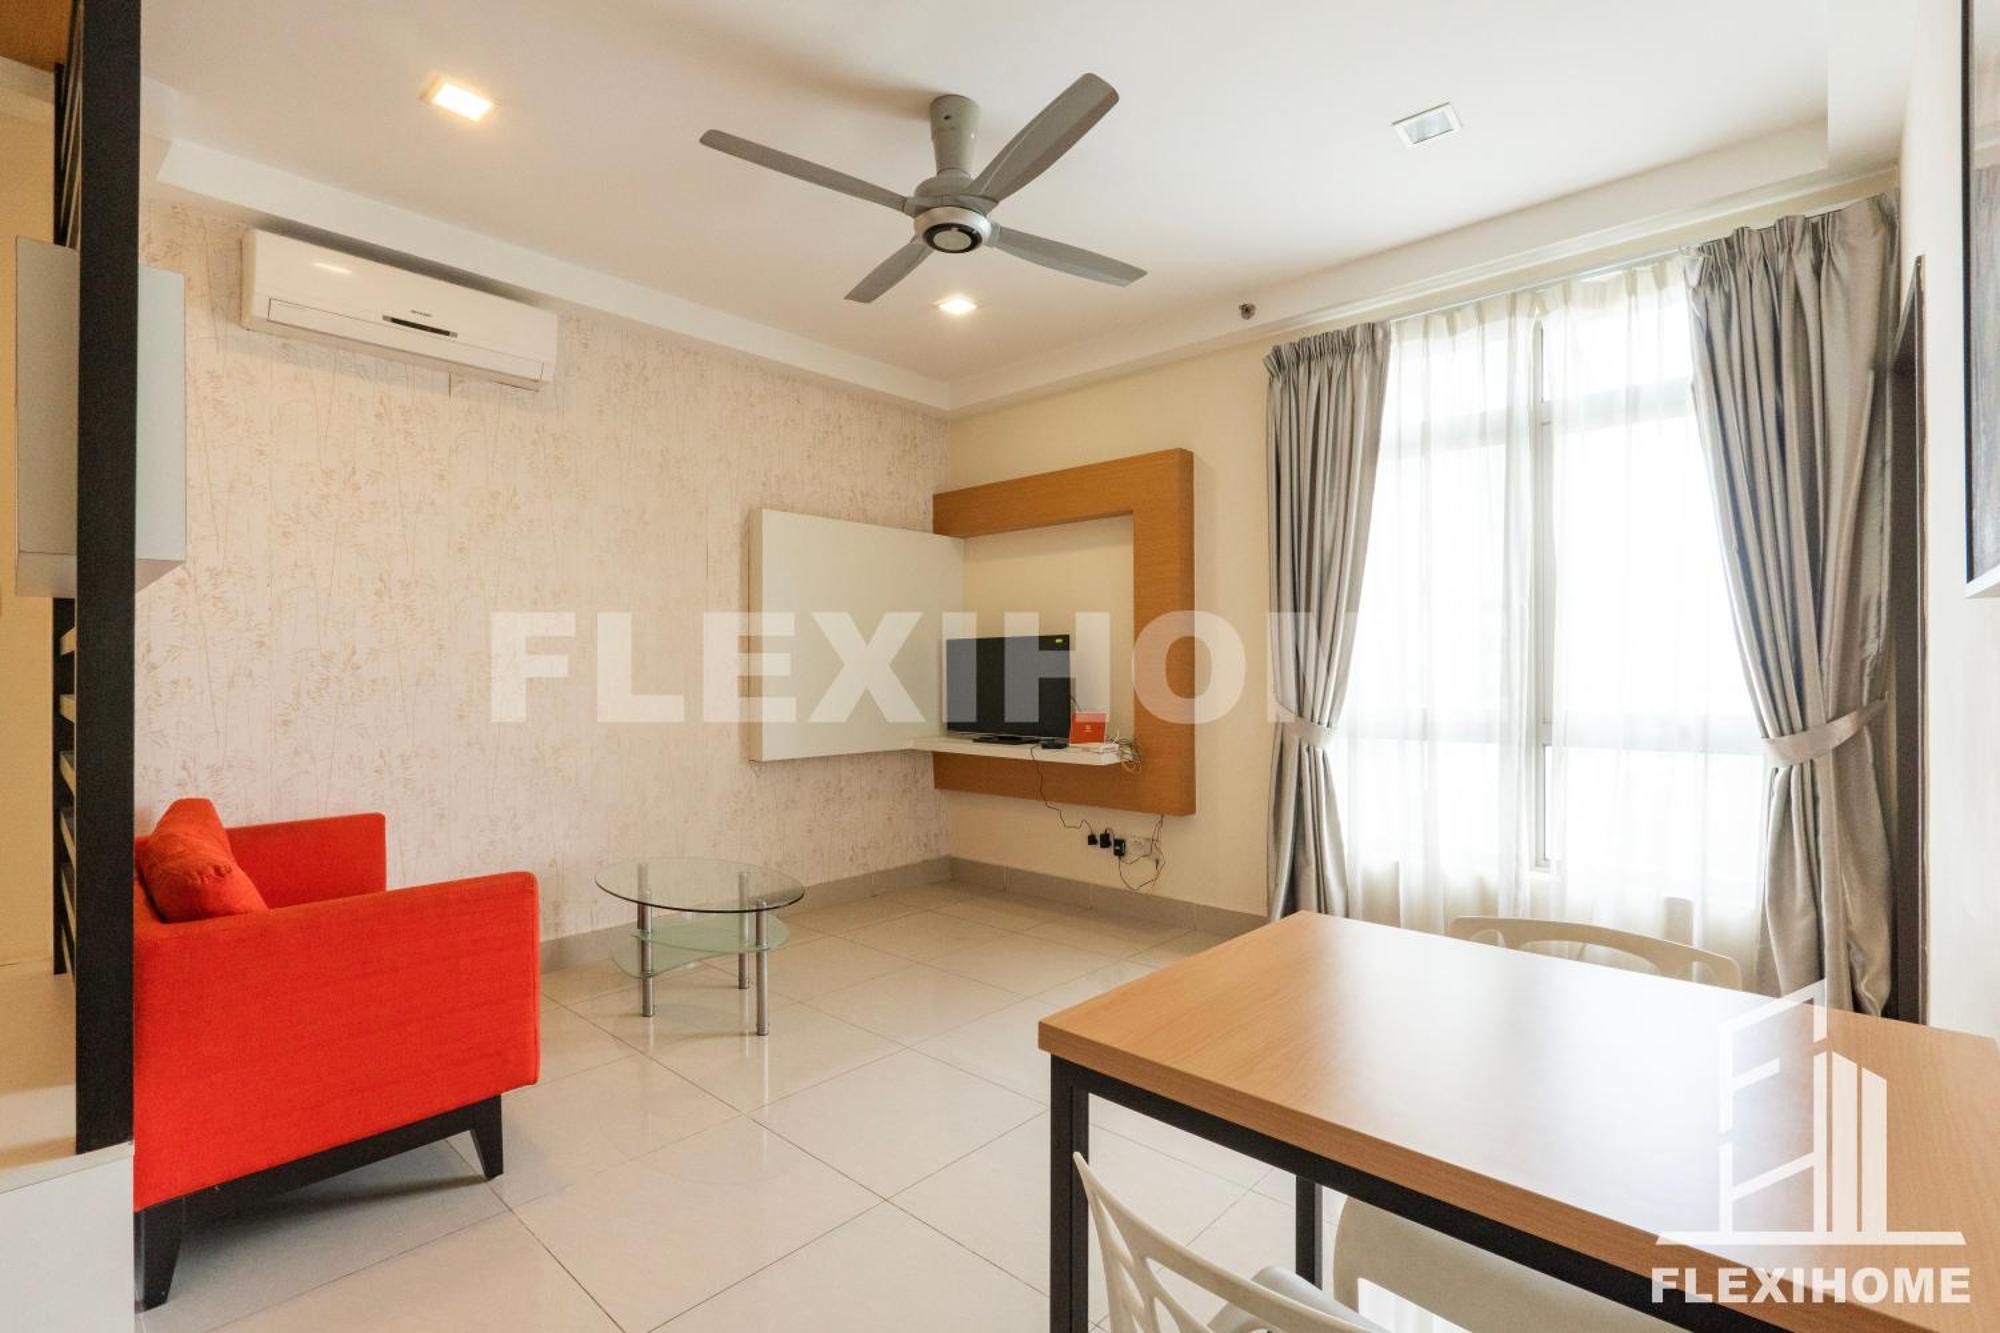 9Am-5Pm, Same Day Check In And Check Out, Work From Home, Shaftsbury-Cyberjaya, Comfy Home By Flexihome-My ภายนอก รูปภาพ